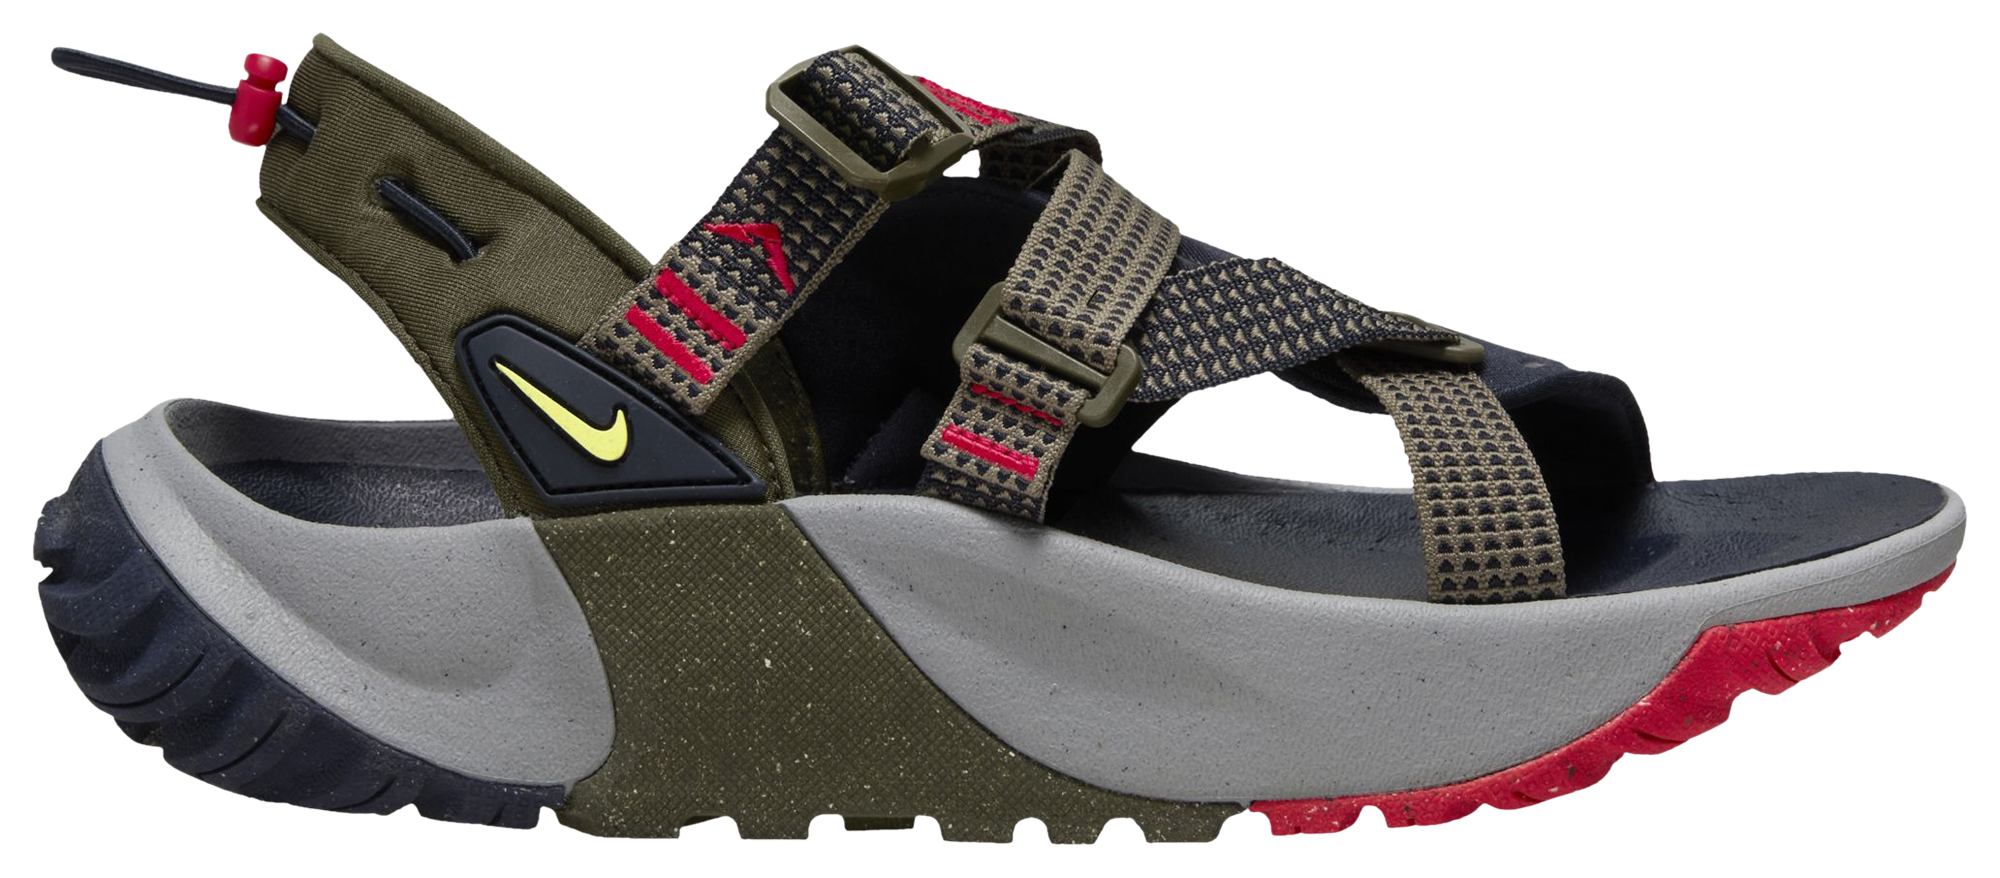 nike sandals for guys